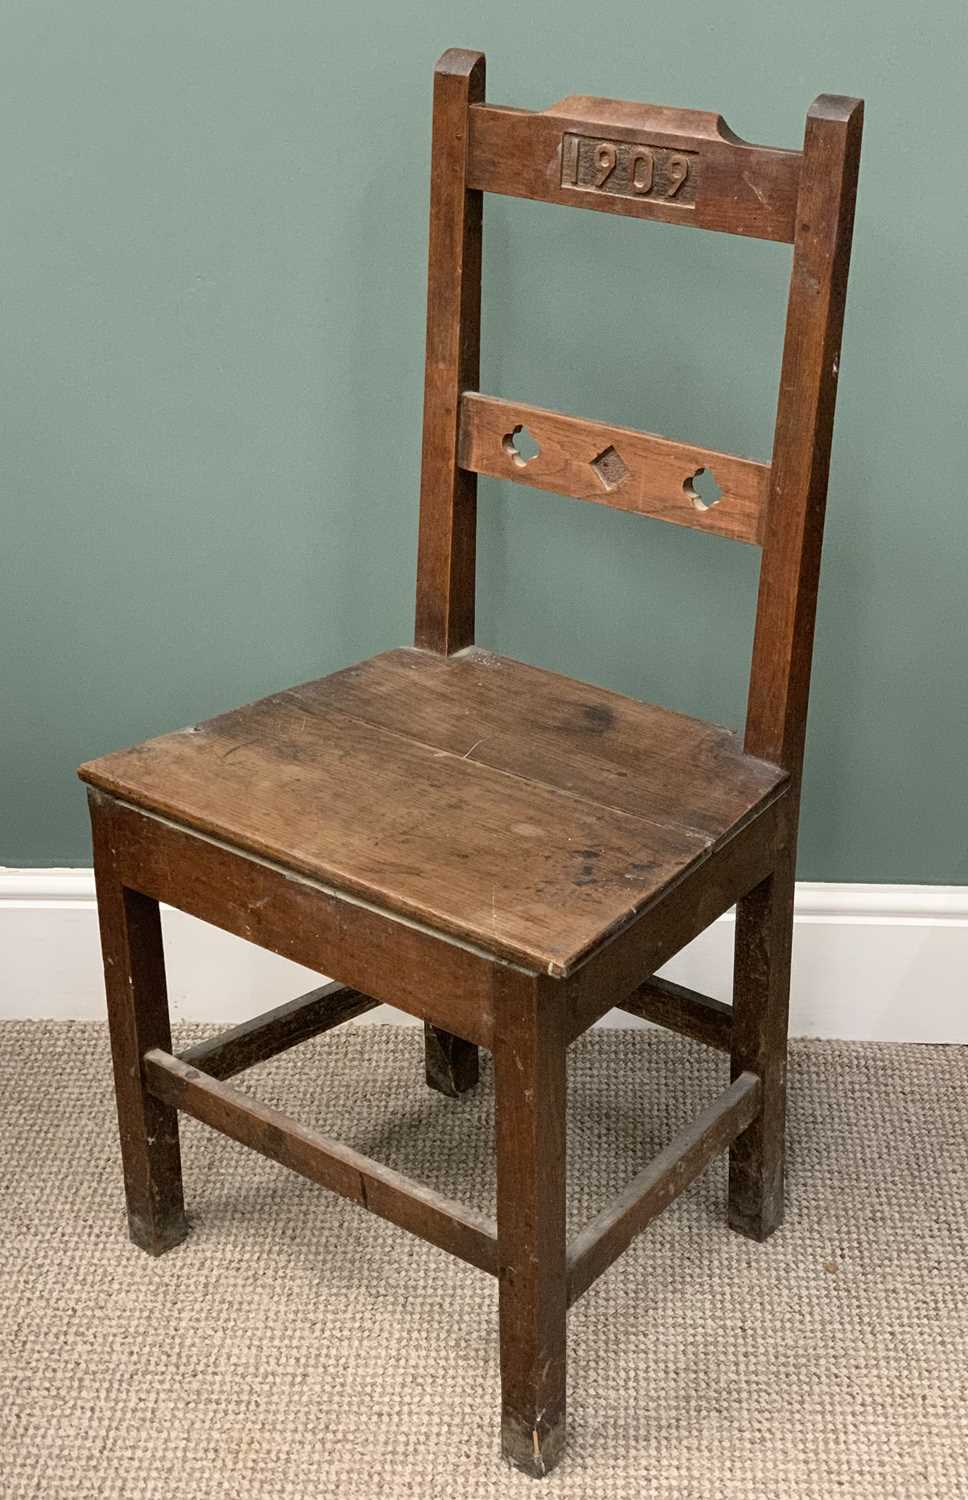 FARMHOUSE CHAIR carved "1909", 96 (h) x 48 (w) x 35 (d) cms and a similar type ELBOW CHAIR - Image 2 of 4